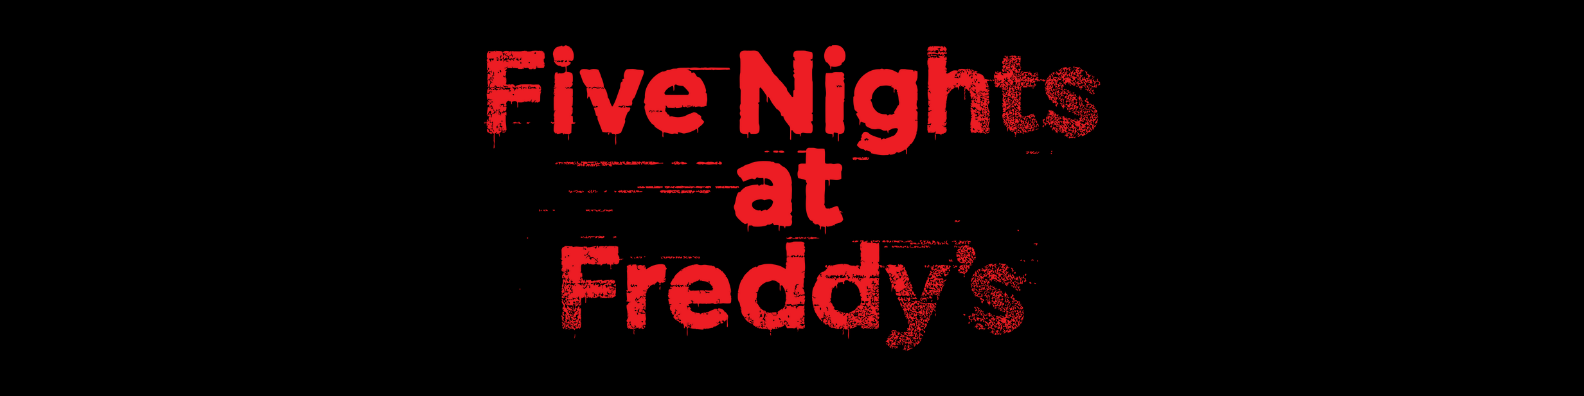 Banner Five Nights at Freddys